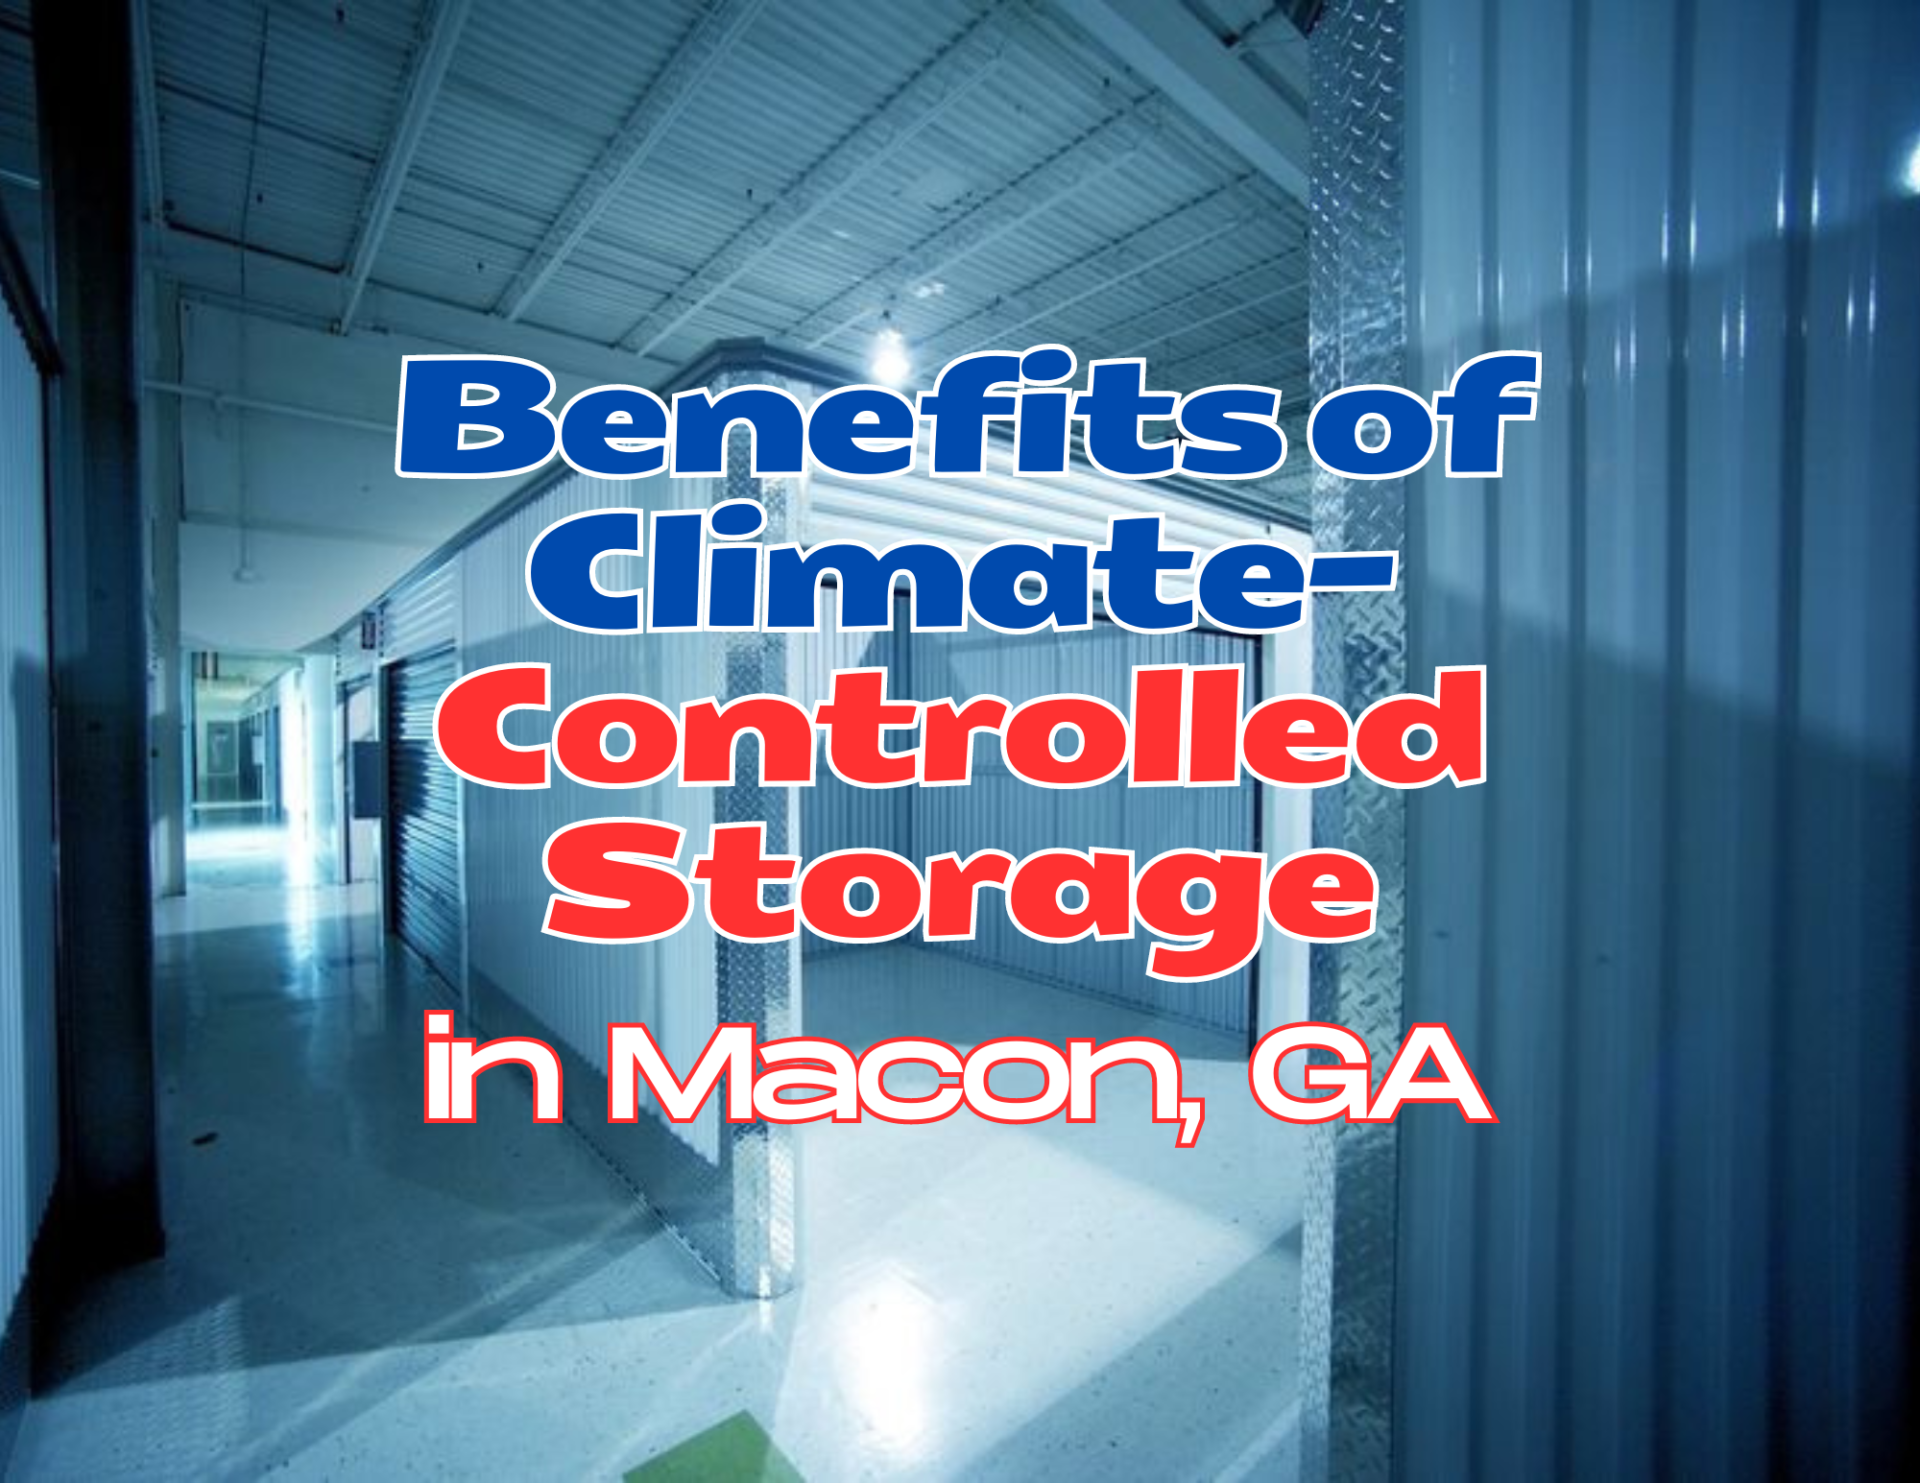 White Modern Coming Soon Flyer Landscape 4 Benefits of Climate-Controlled Storage in Macon